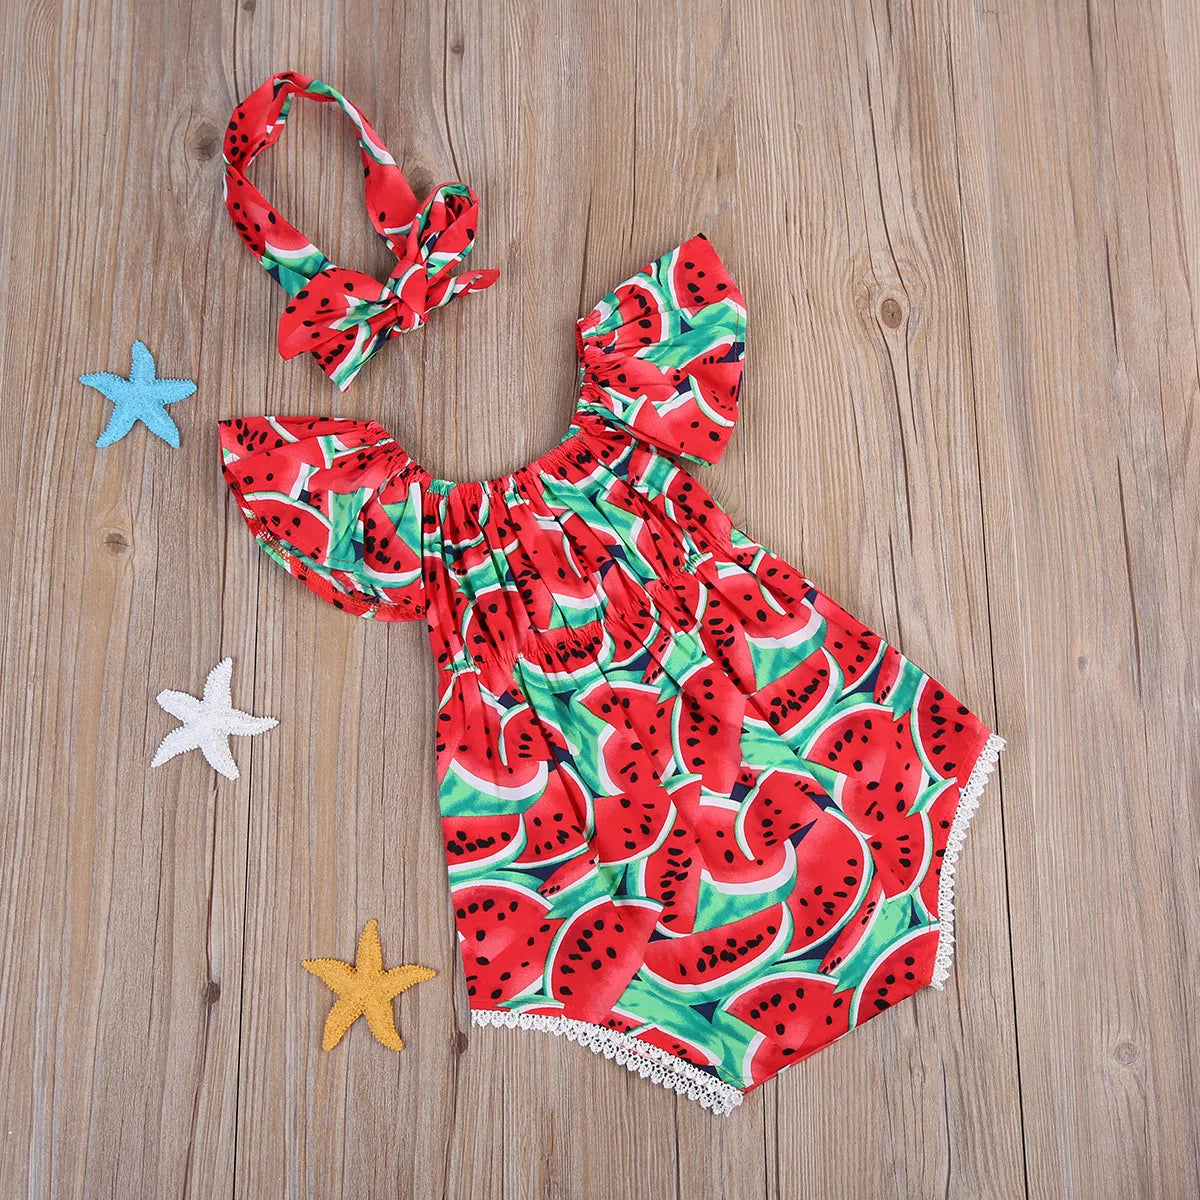 Toddler Infant Baby Girls Ropmers Cute Watermelon Ruffles Short Sleeve Bodysuit+Headband 2pcs Outfits Sets Lovely Summer Outfits